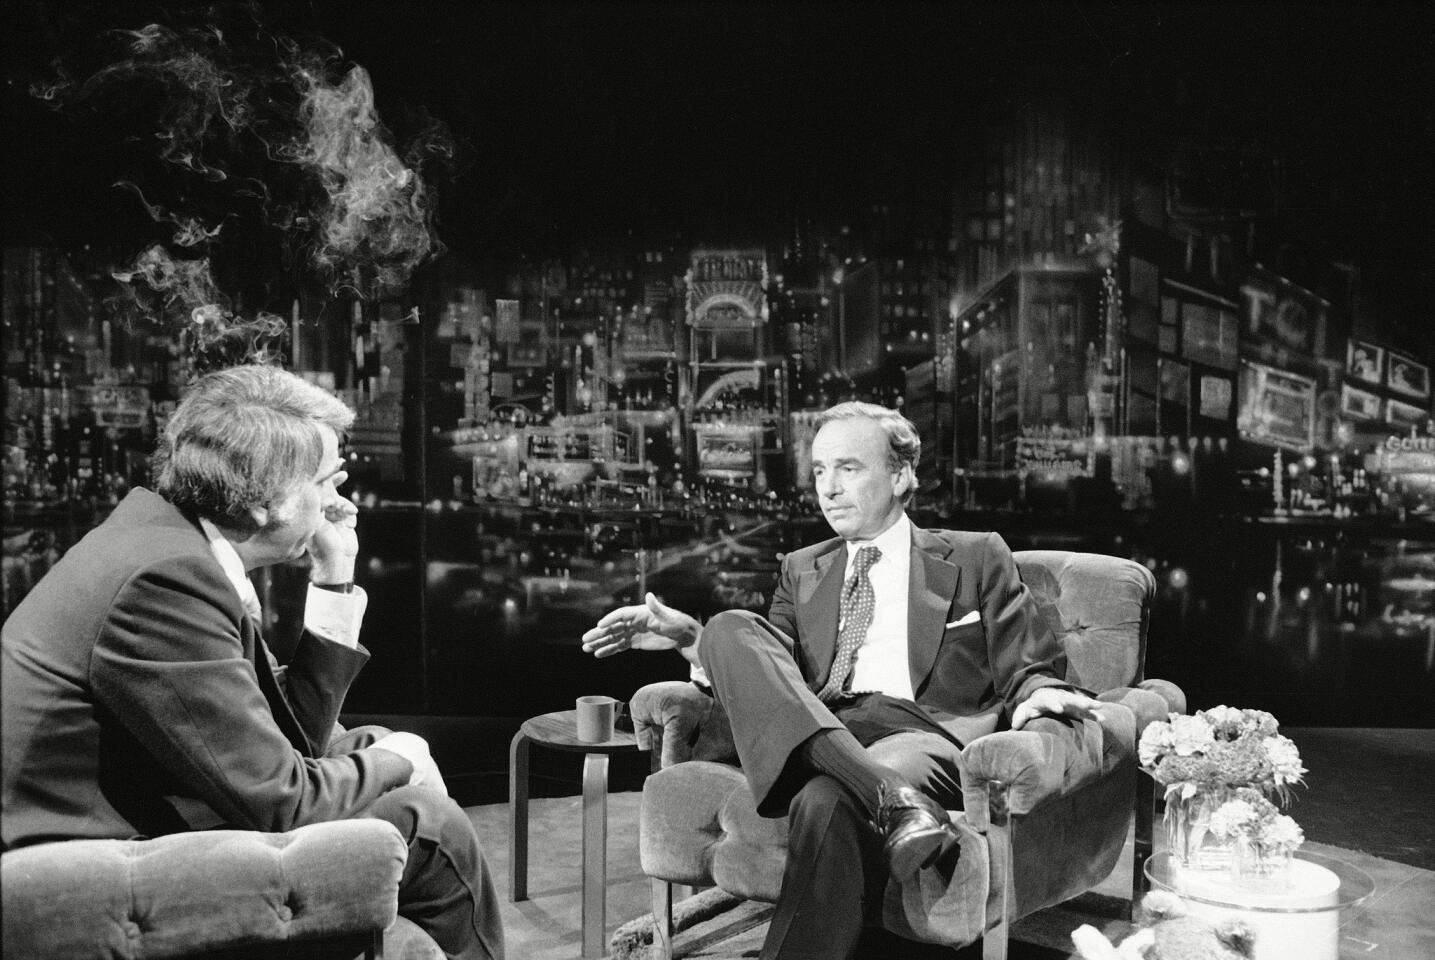 Rupert Murdoch, right, speaks with Tom Snyder on NBC's "Tomorrow" show on Sept. 12, 1978 in New York City.